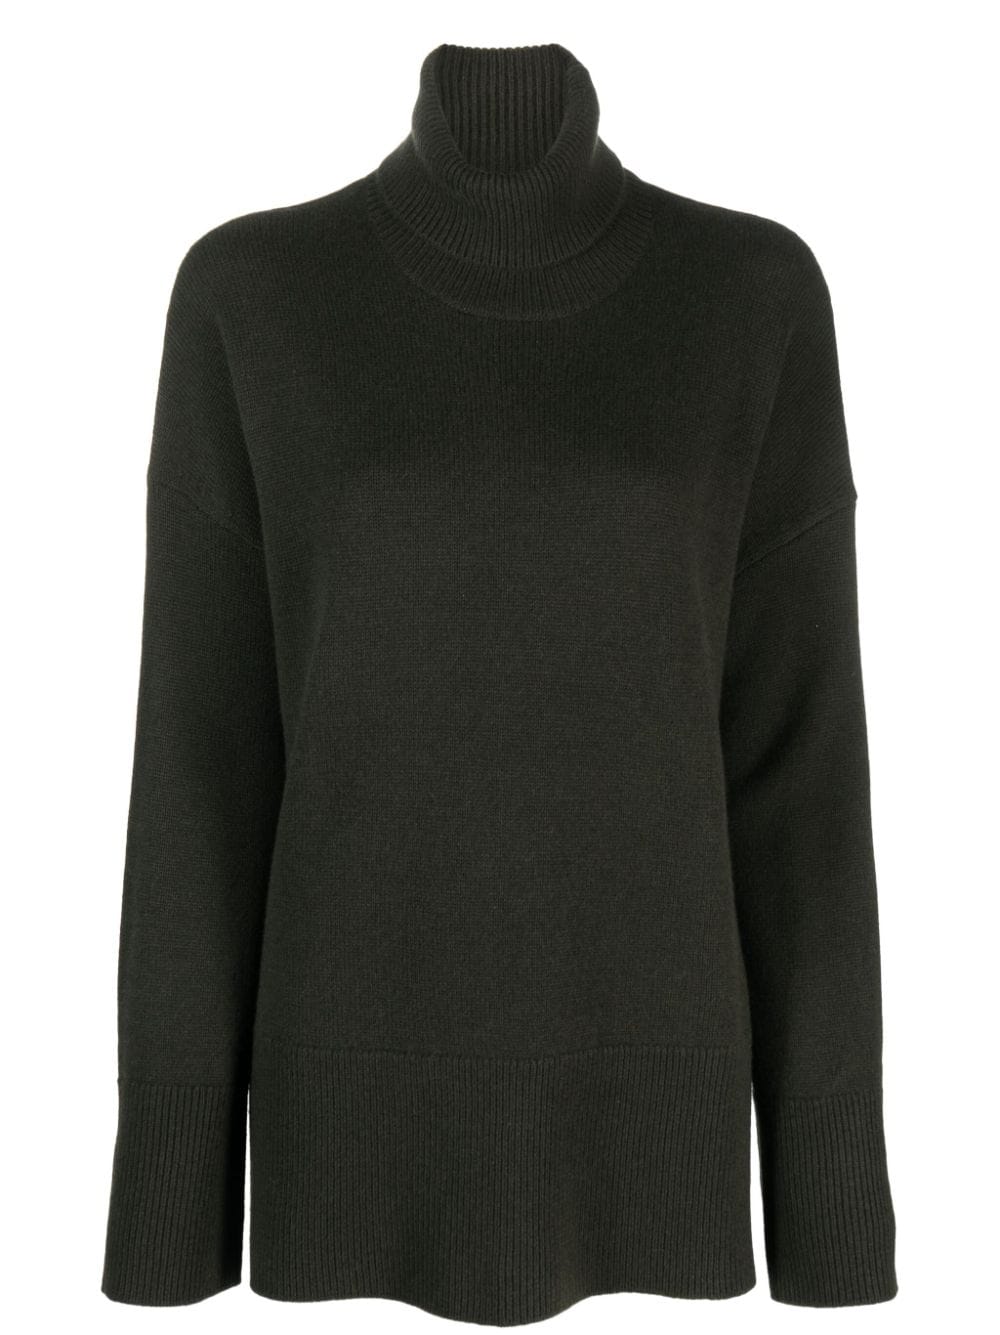 P.a.r.o.s.h Turtle Neck Long Sweater In Olive Green